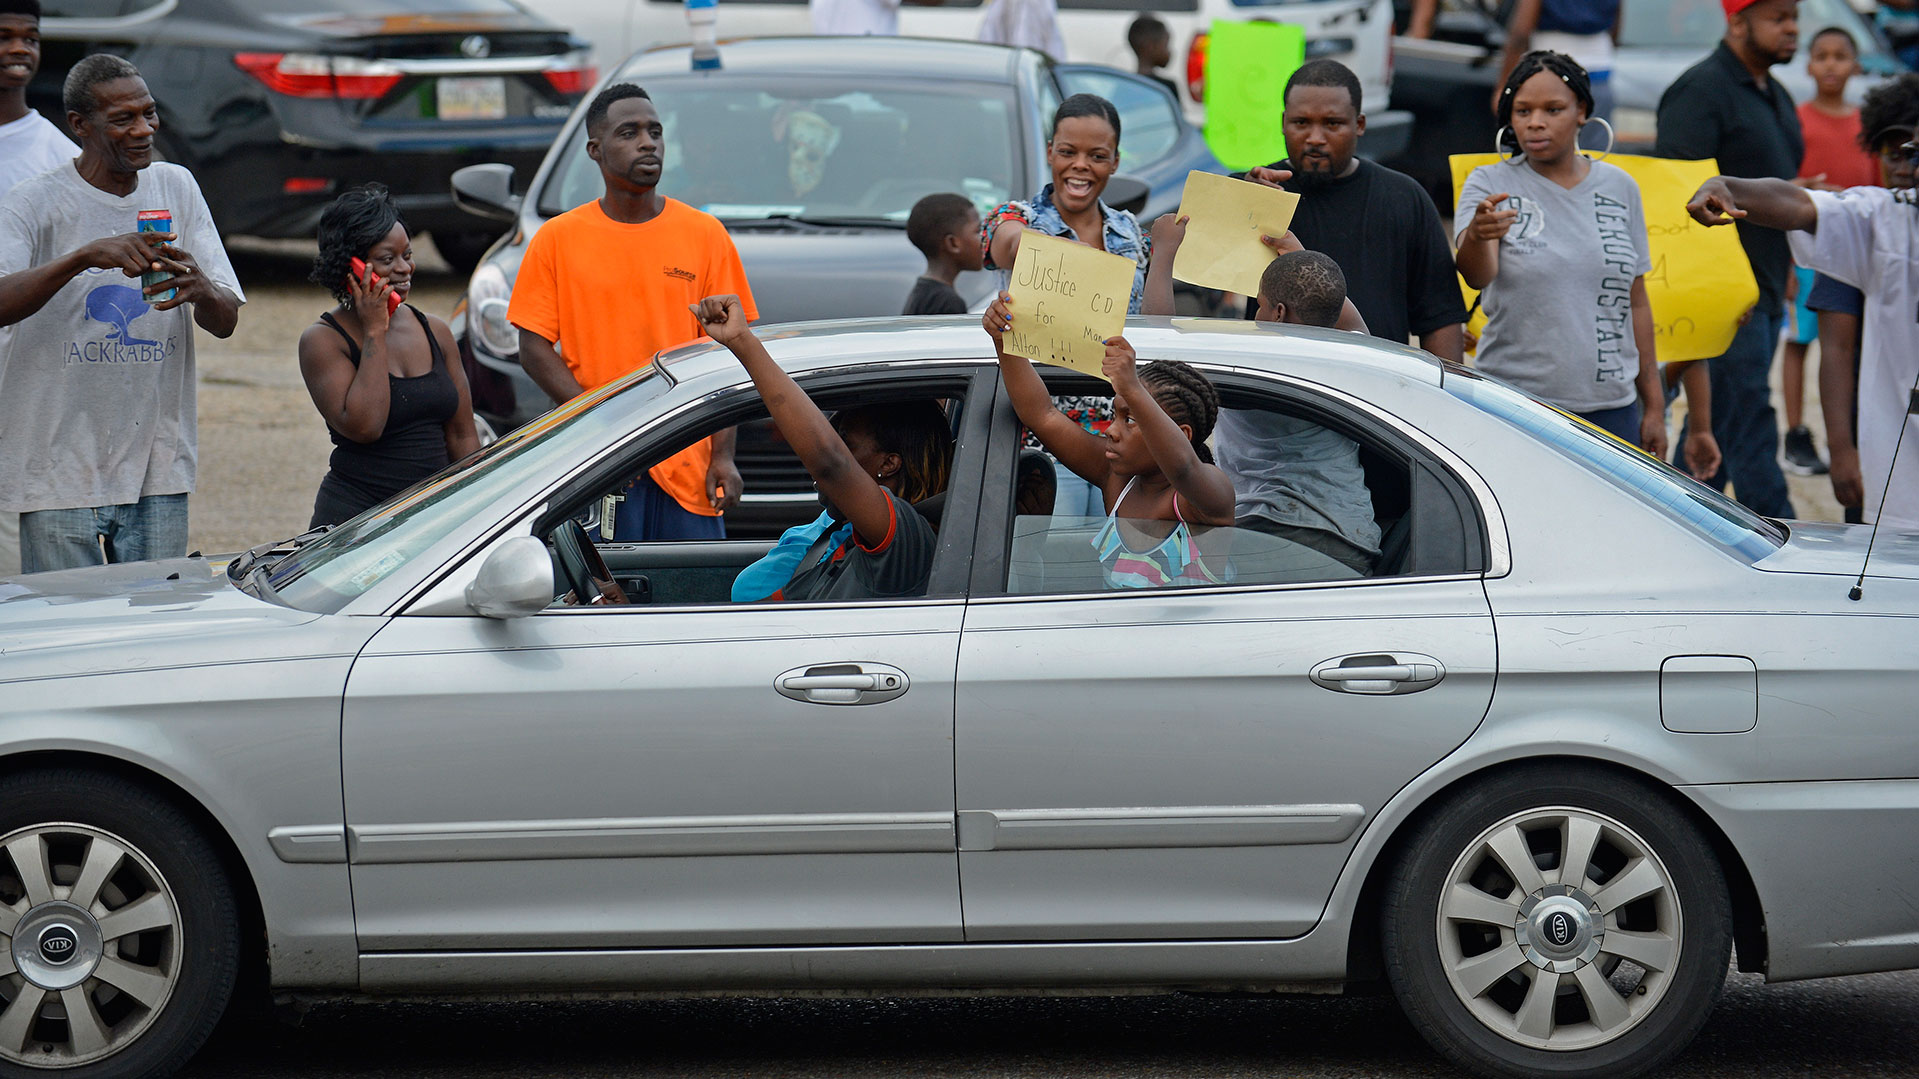 People gather in protest outside of the Triple S Food Mart on N. Foster at Fairfields Avenue, after the officer-involved fatal shooting of Alton Sterling on Tuesday, July 5, 2016, in Baton Rouge, La. An autopsy shows Sterling, 37, of Baton Rouge, died Tuesday of multiple gunshot wounds to the chest and back, said East Baton Rouge Parish Coroner Dr. William Clark. Officers responded to the store about 12:35 a.m. Tuesday after an anonymous caller indicated a man selling music CDs and wearing a red shirt threatened him with a gun, said Cpl. L'Jean McKneely. (Hilary Scheinuk/The Advocate via AP)